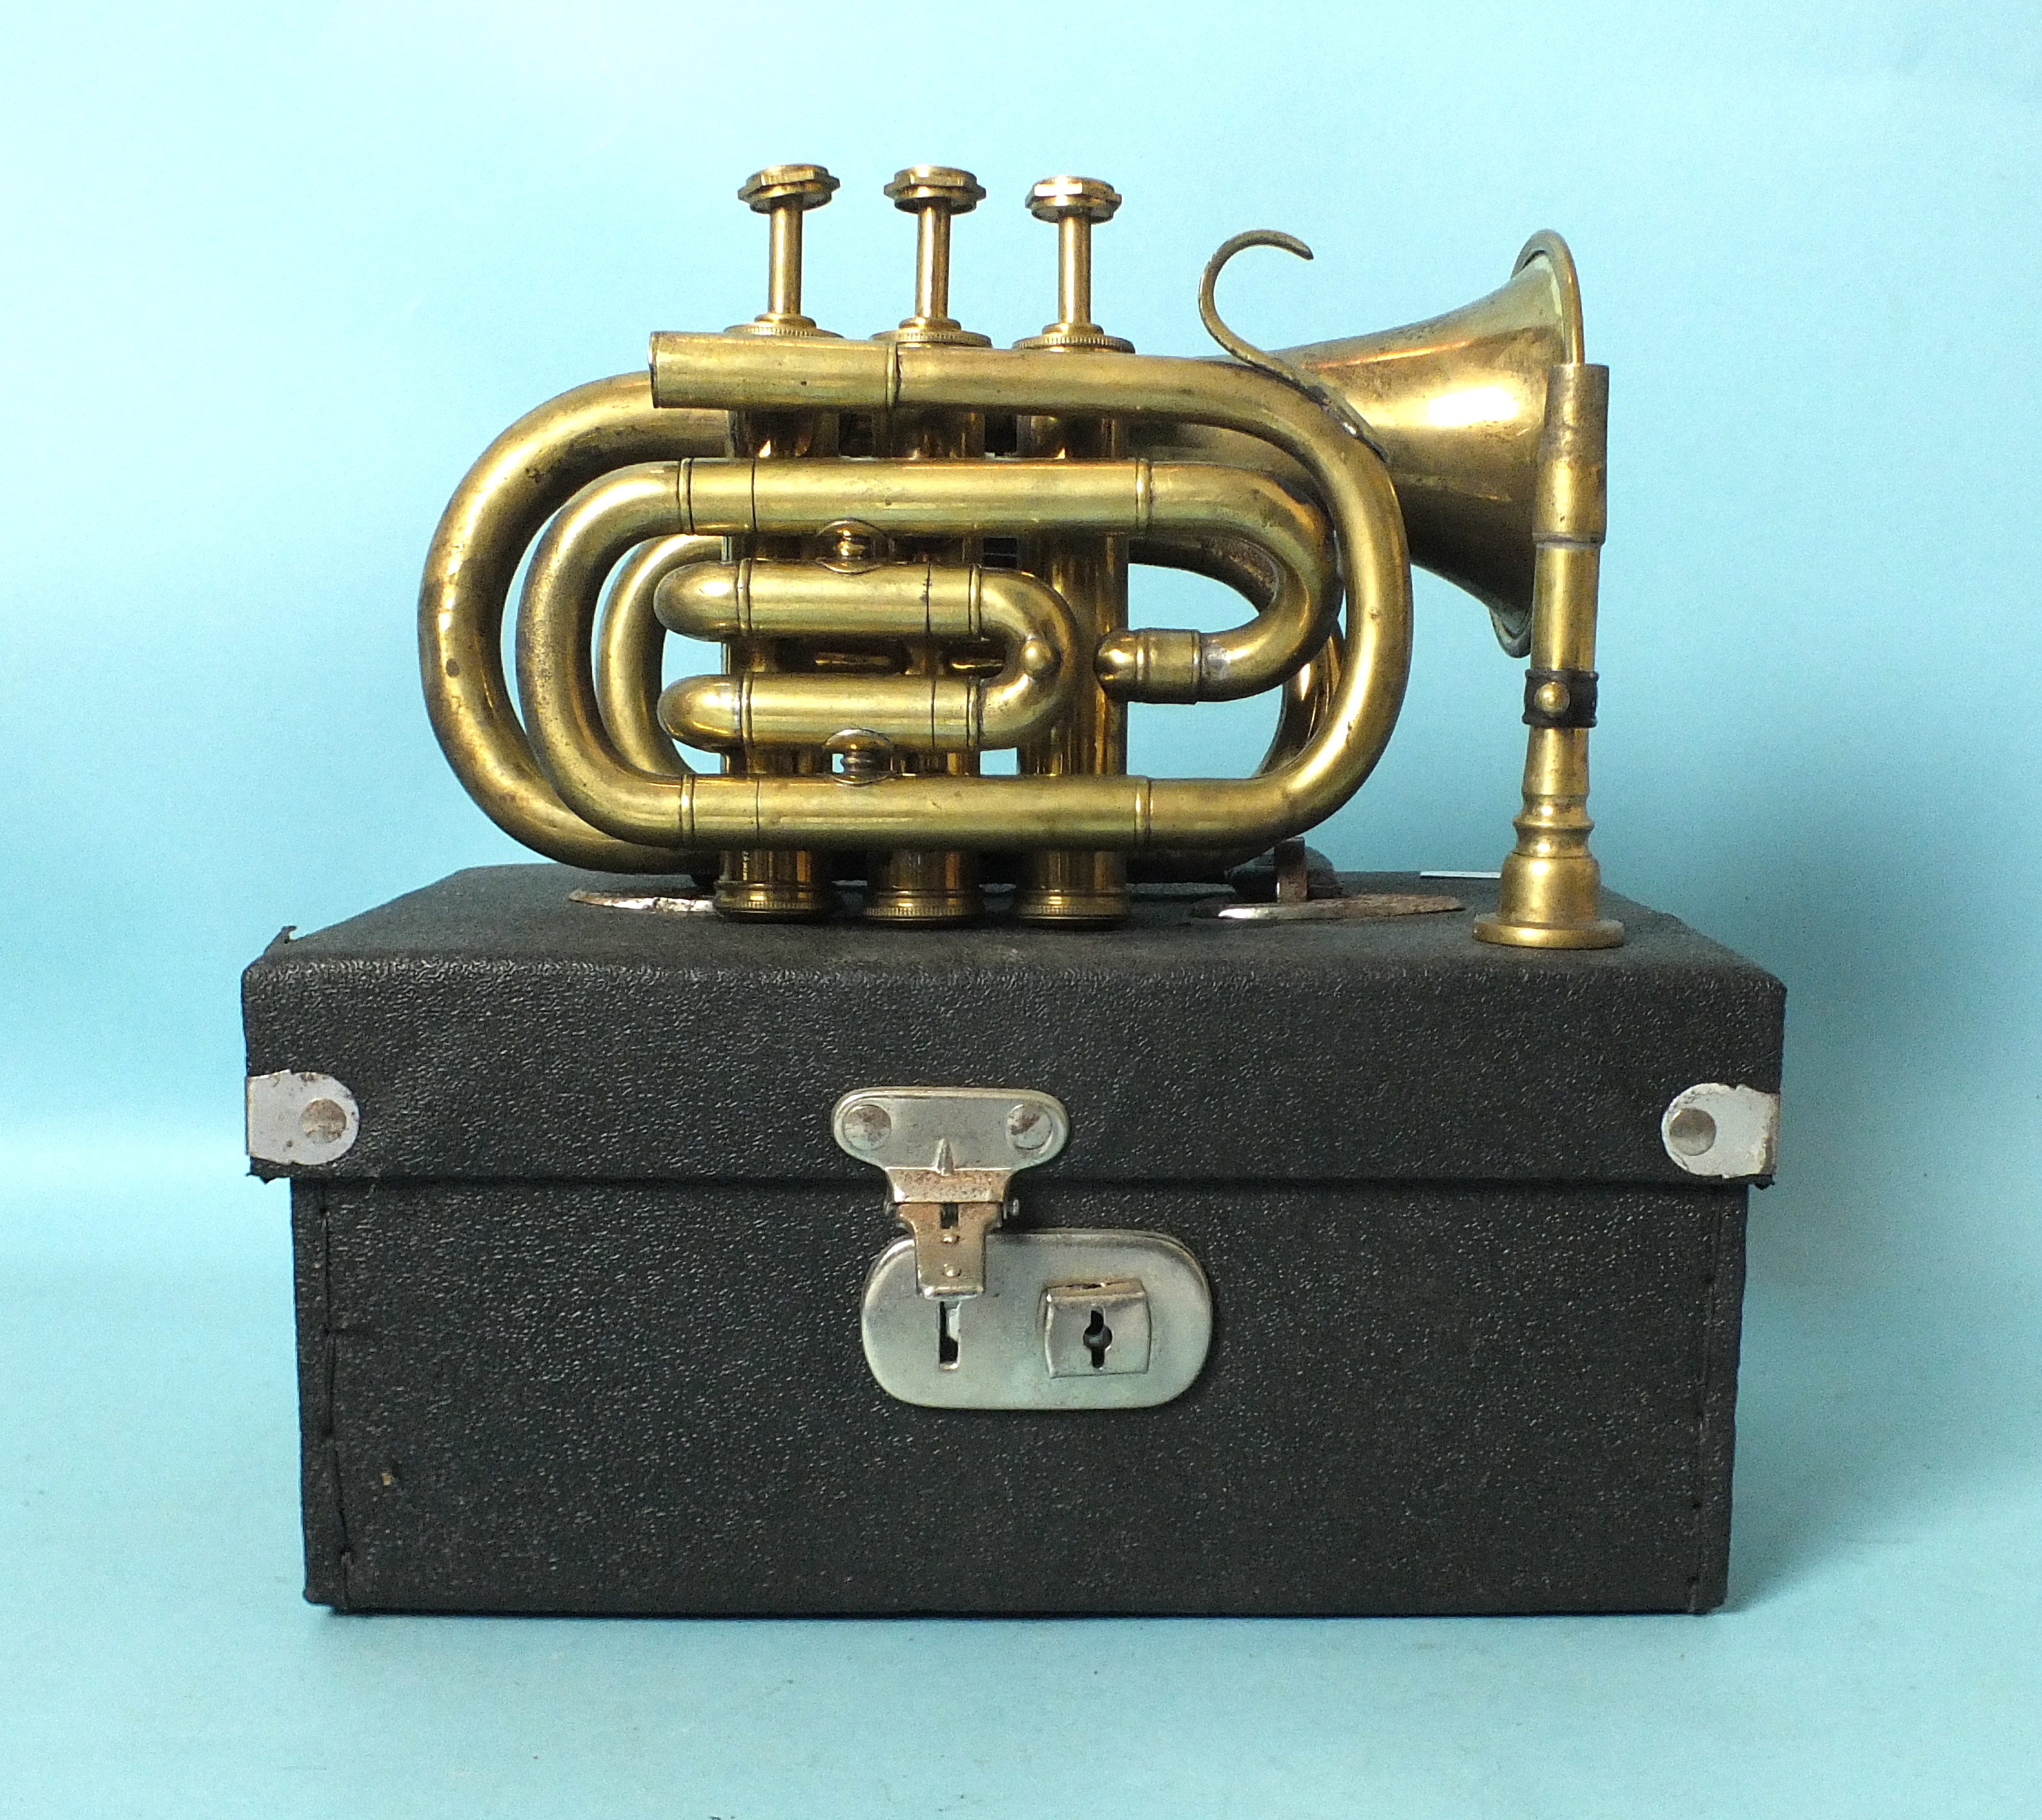 A pocket trumpet by Boosey, "Heley" no.94059, in case.